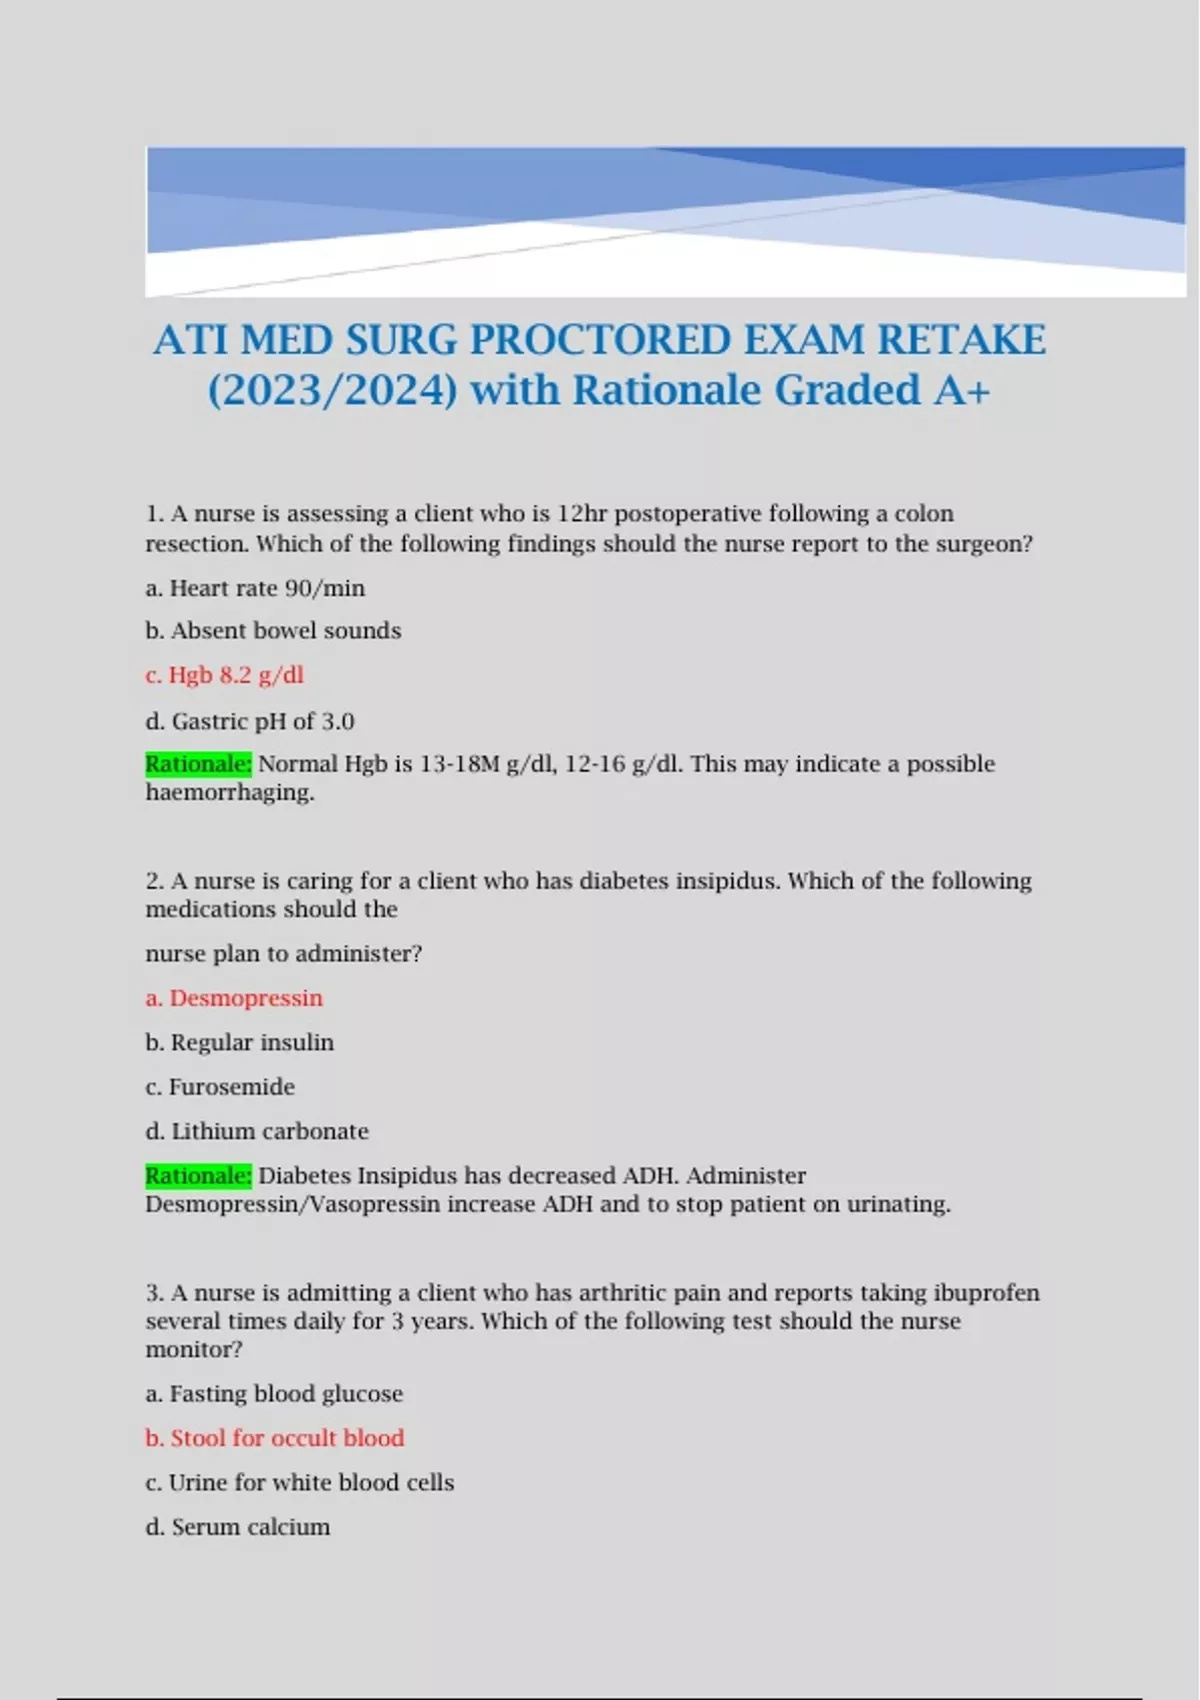 ATI MED SURG PROCTORED EXAM RETAKE (2023/2024) with Rationale Graded A+